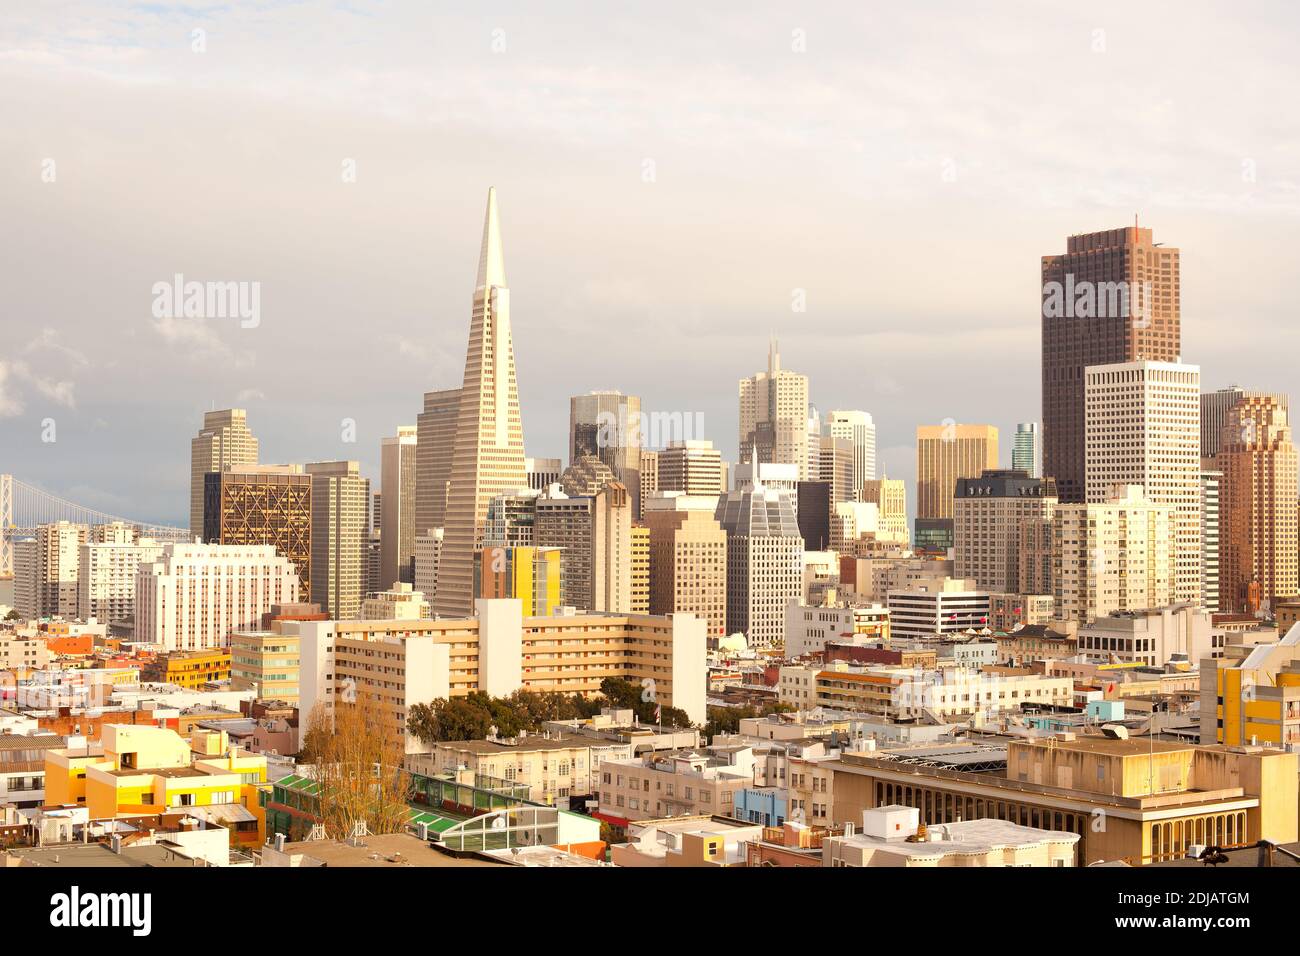 Cityscape of Financial District and North Beach neighborhood in San Francisco, California, United States Stock Photo